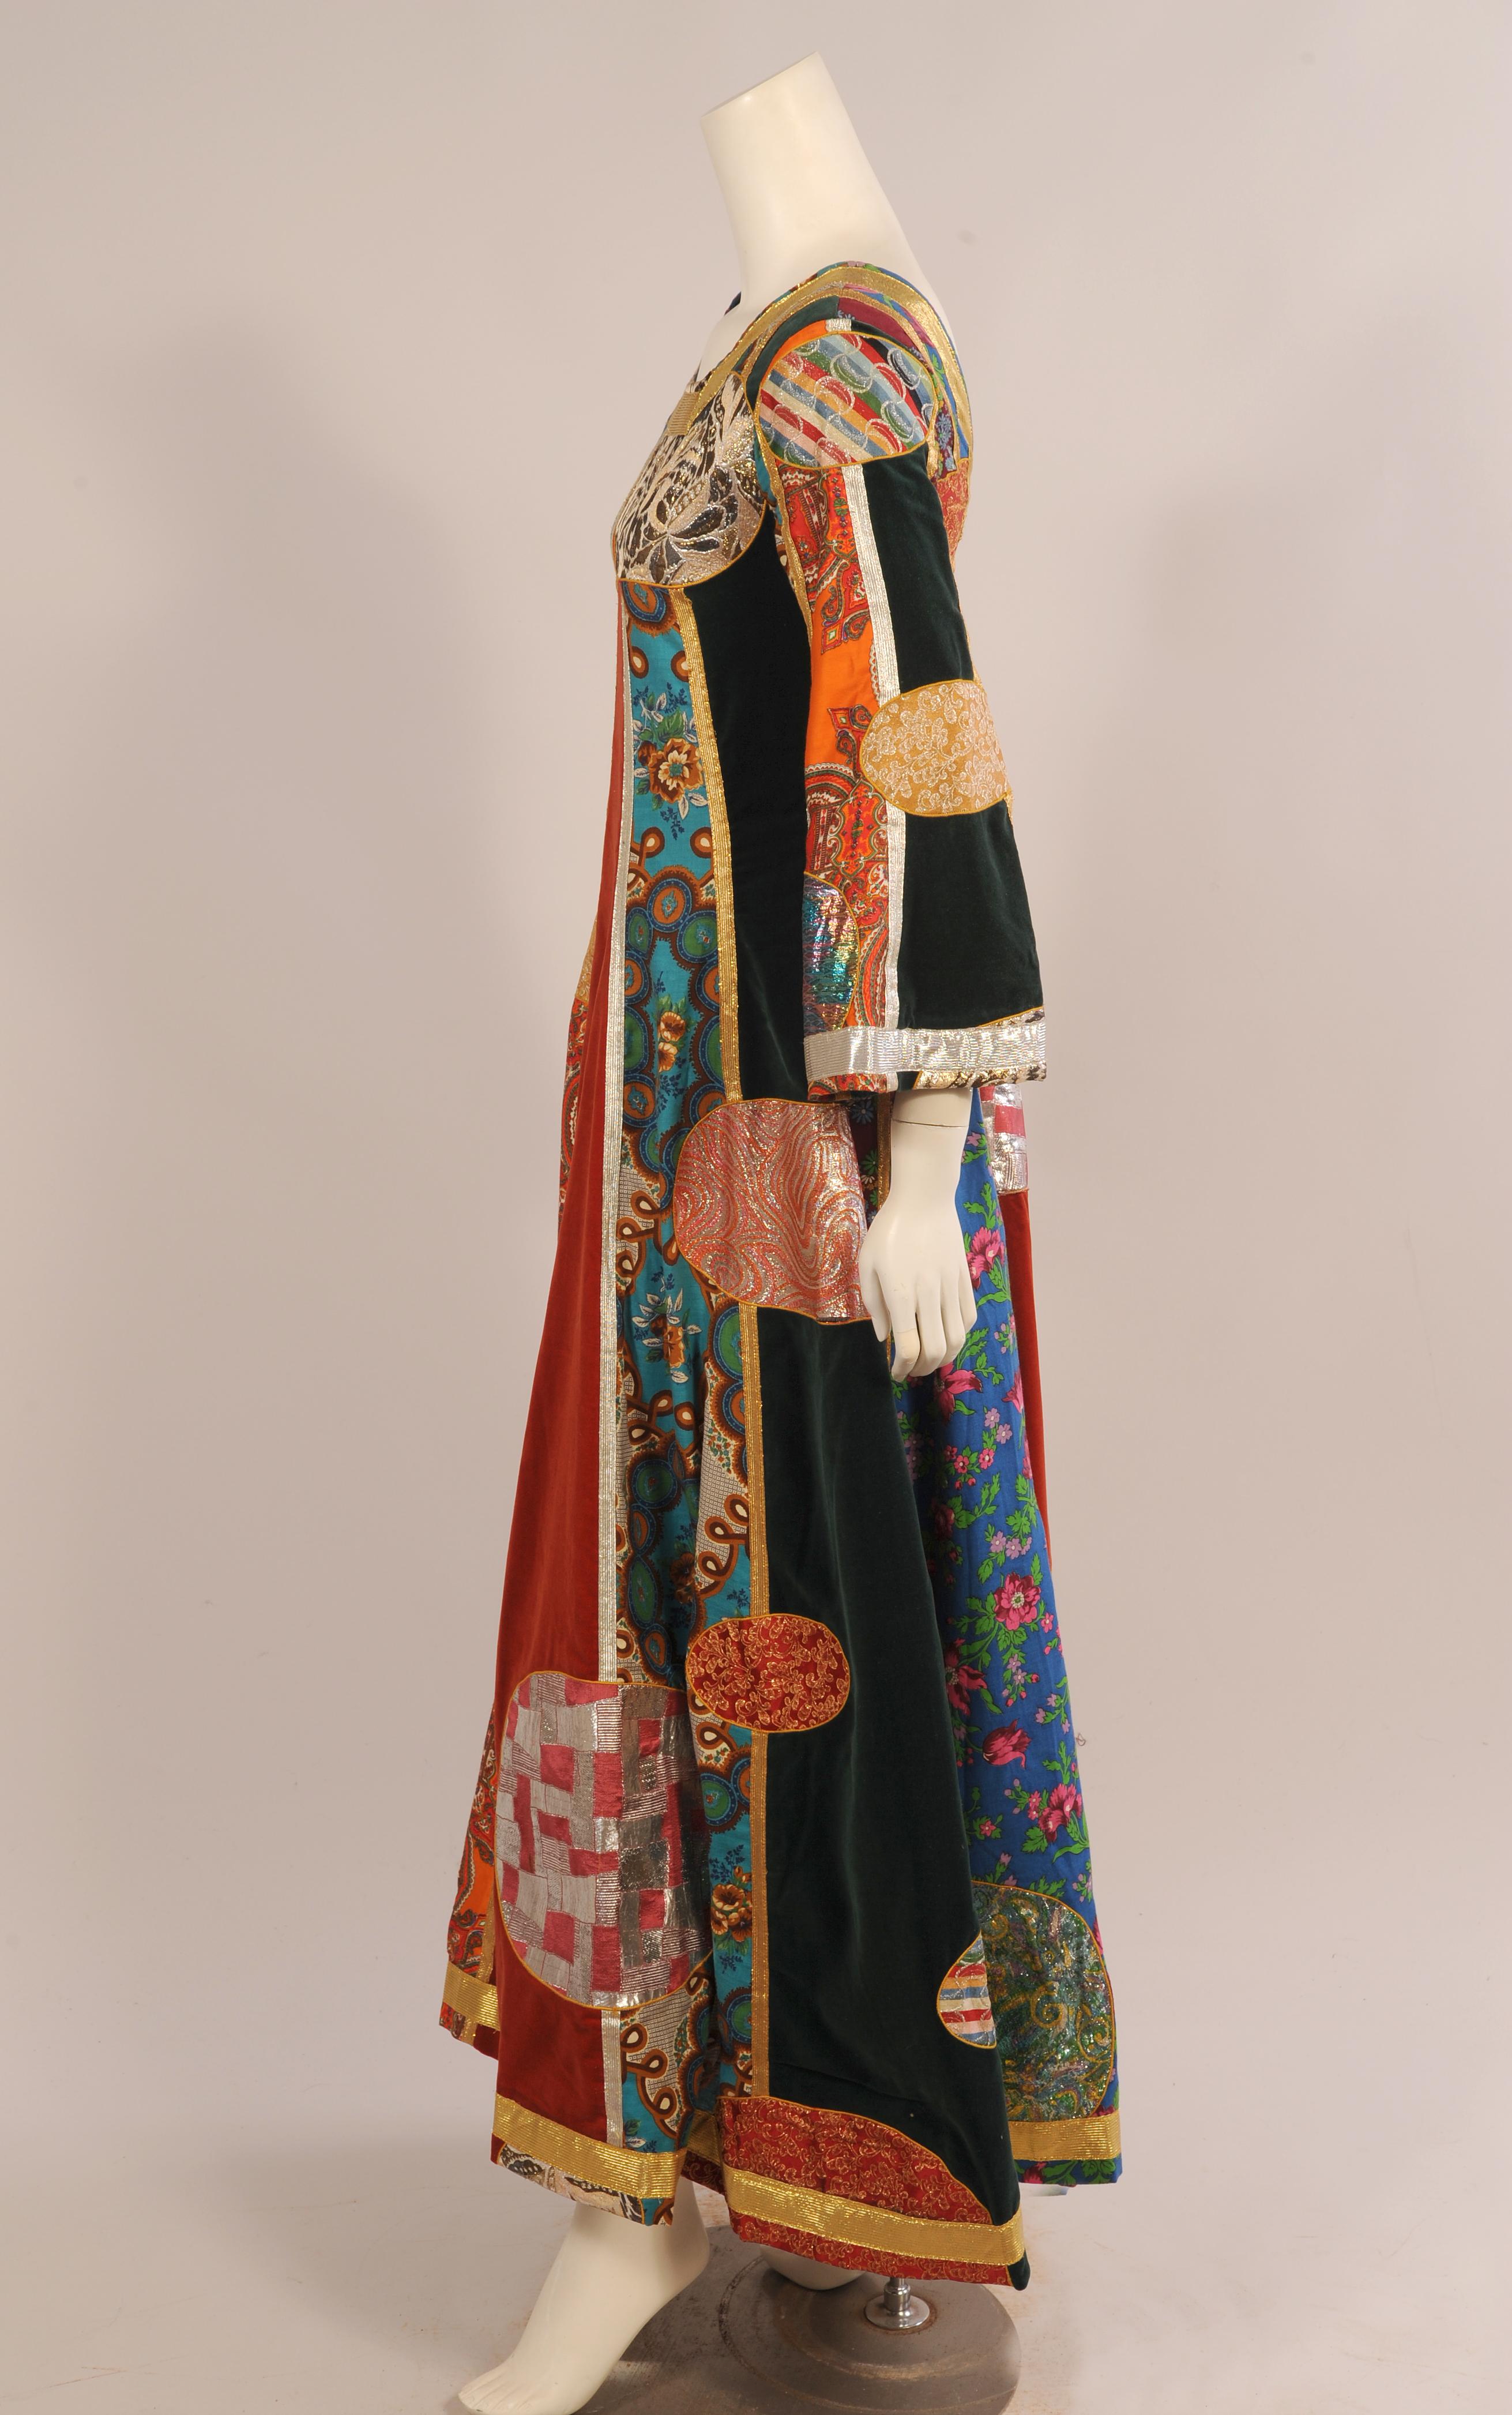 Giorgio di Sant' Angelo designed this colorful patchwork Klimt dress for his second collection in the Fall of 1969. It is thought that the golden patchwork garment seen in Gustav Klimt's painting of Adele Bloch-Bauer was perhaps the inspiration for